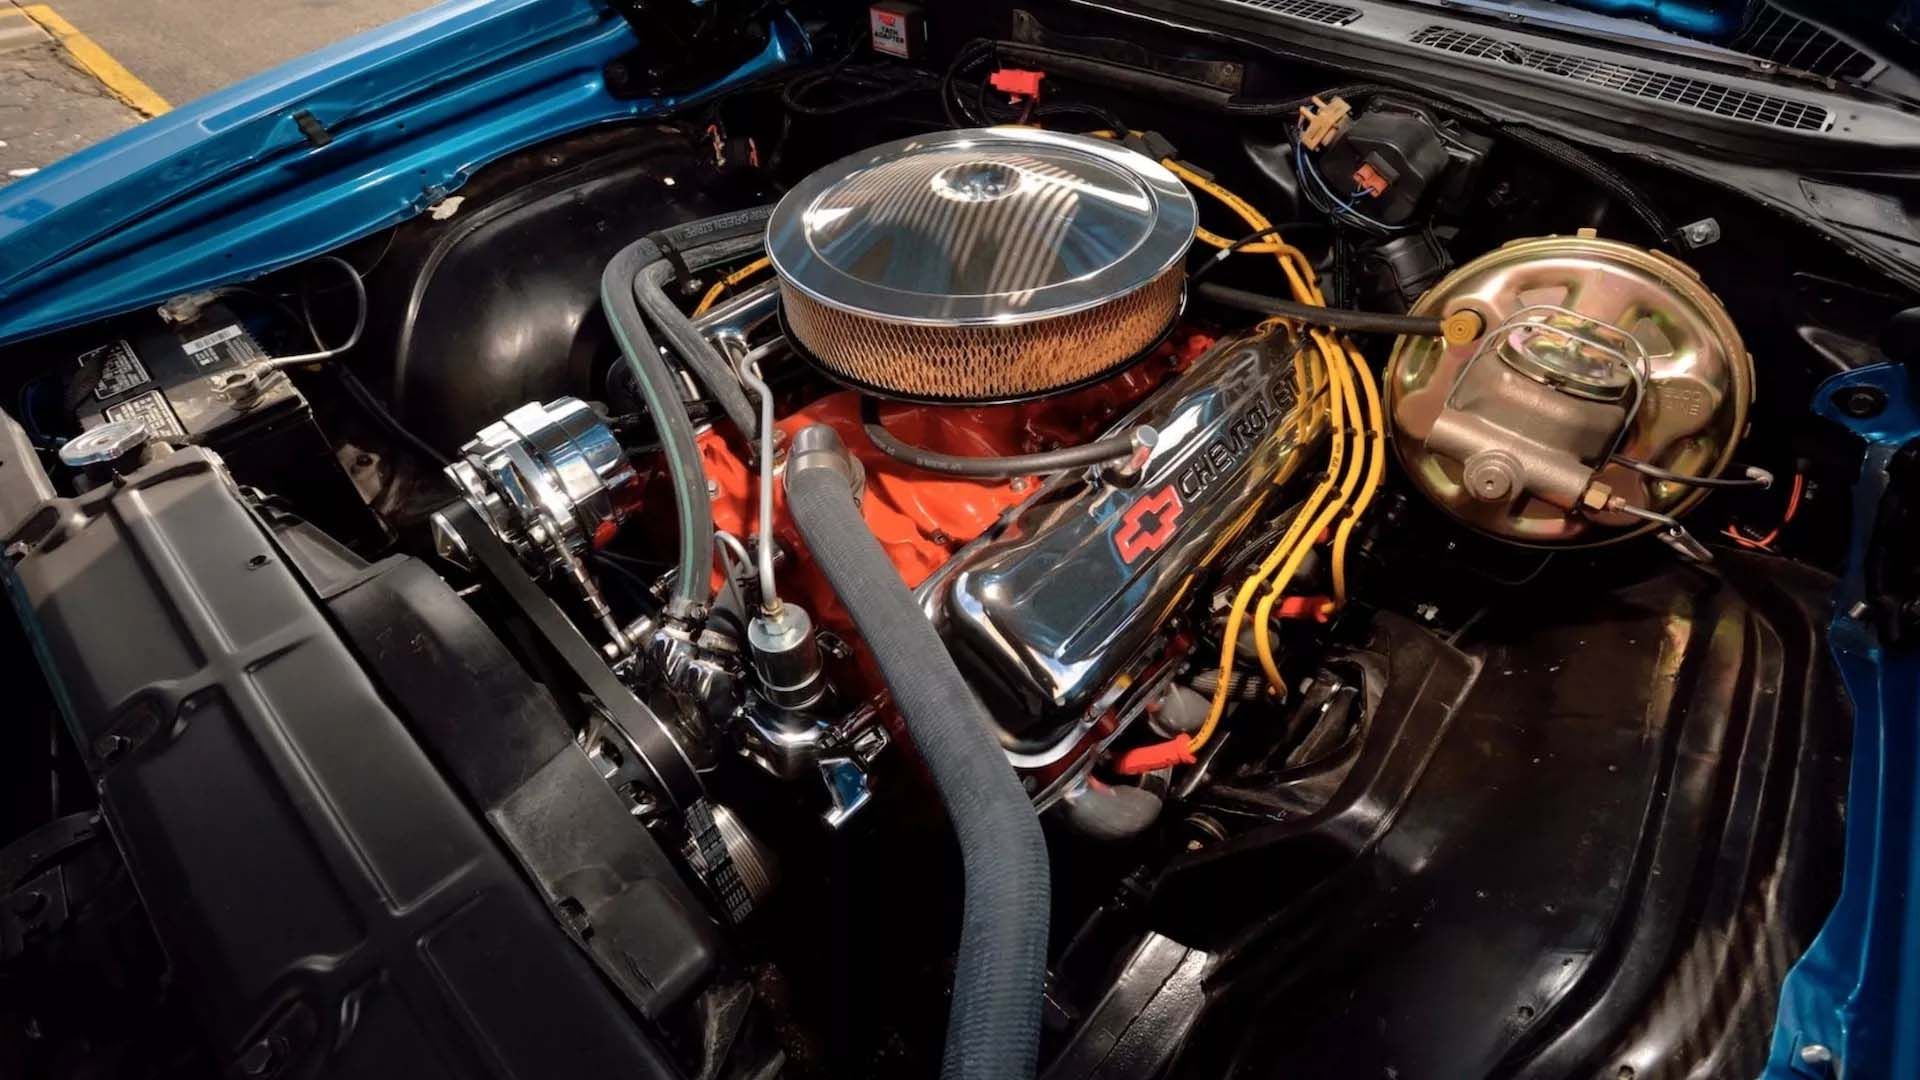 Engine bay of a 1969 Chevrolet Chevelle SS 396 Convertible from Bruce Springsteen